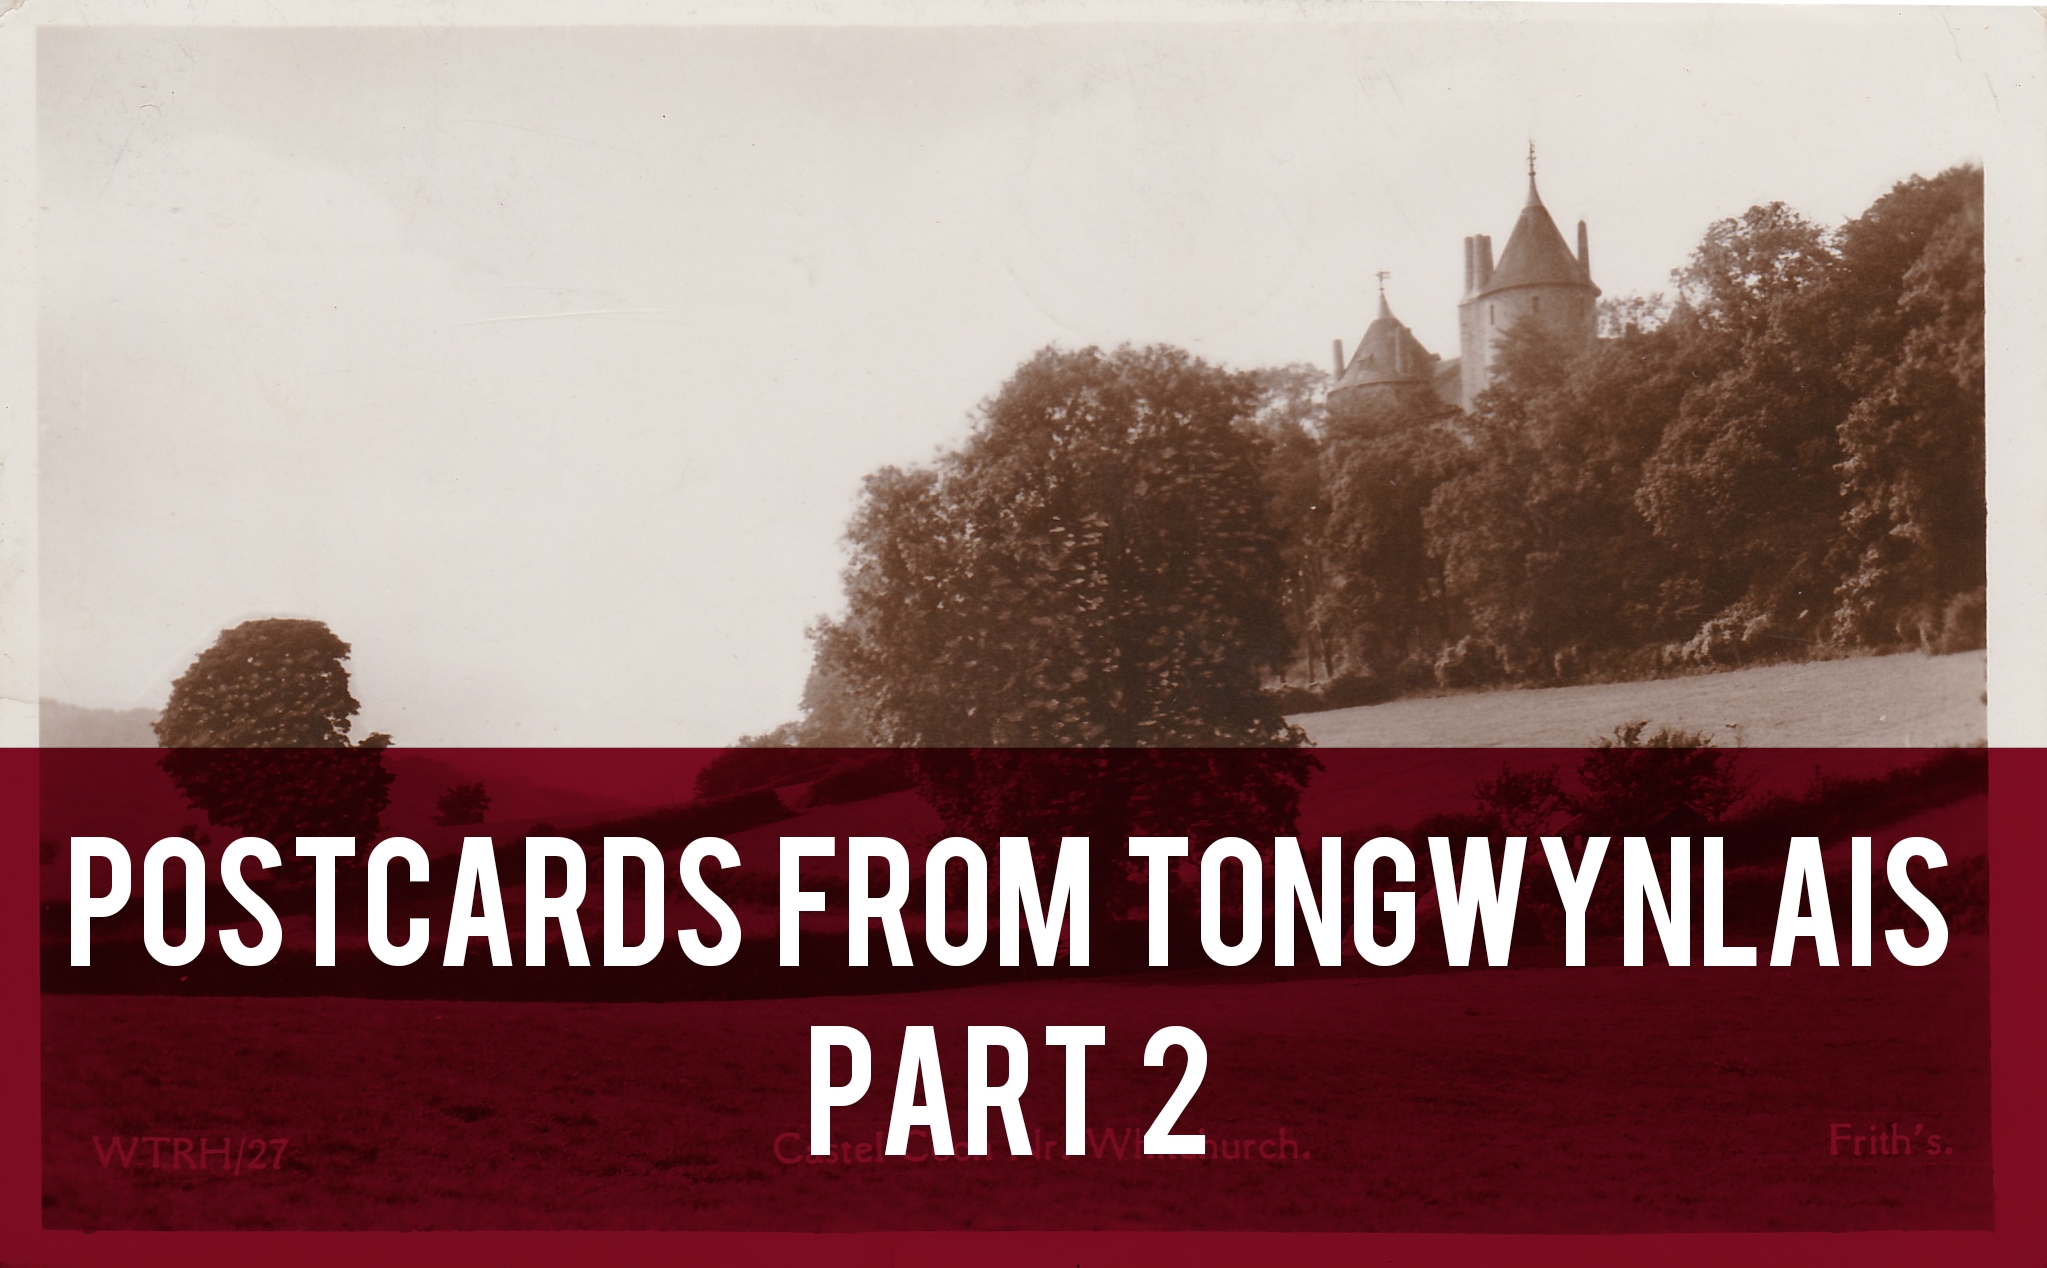 Postcards from Tongwynlais Part 2 header